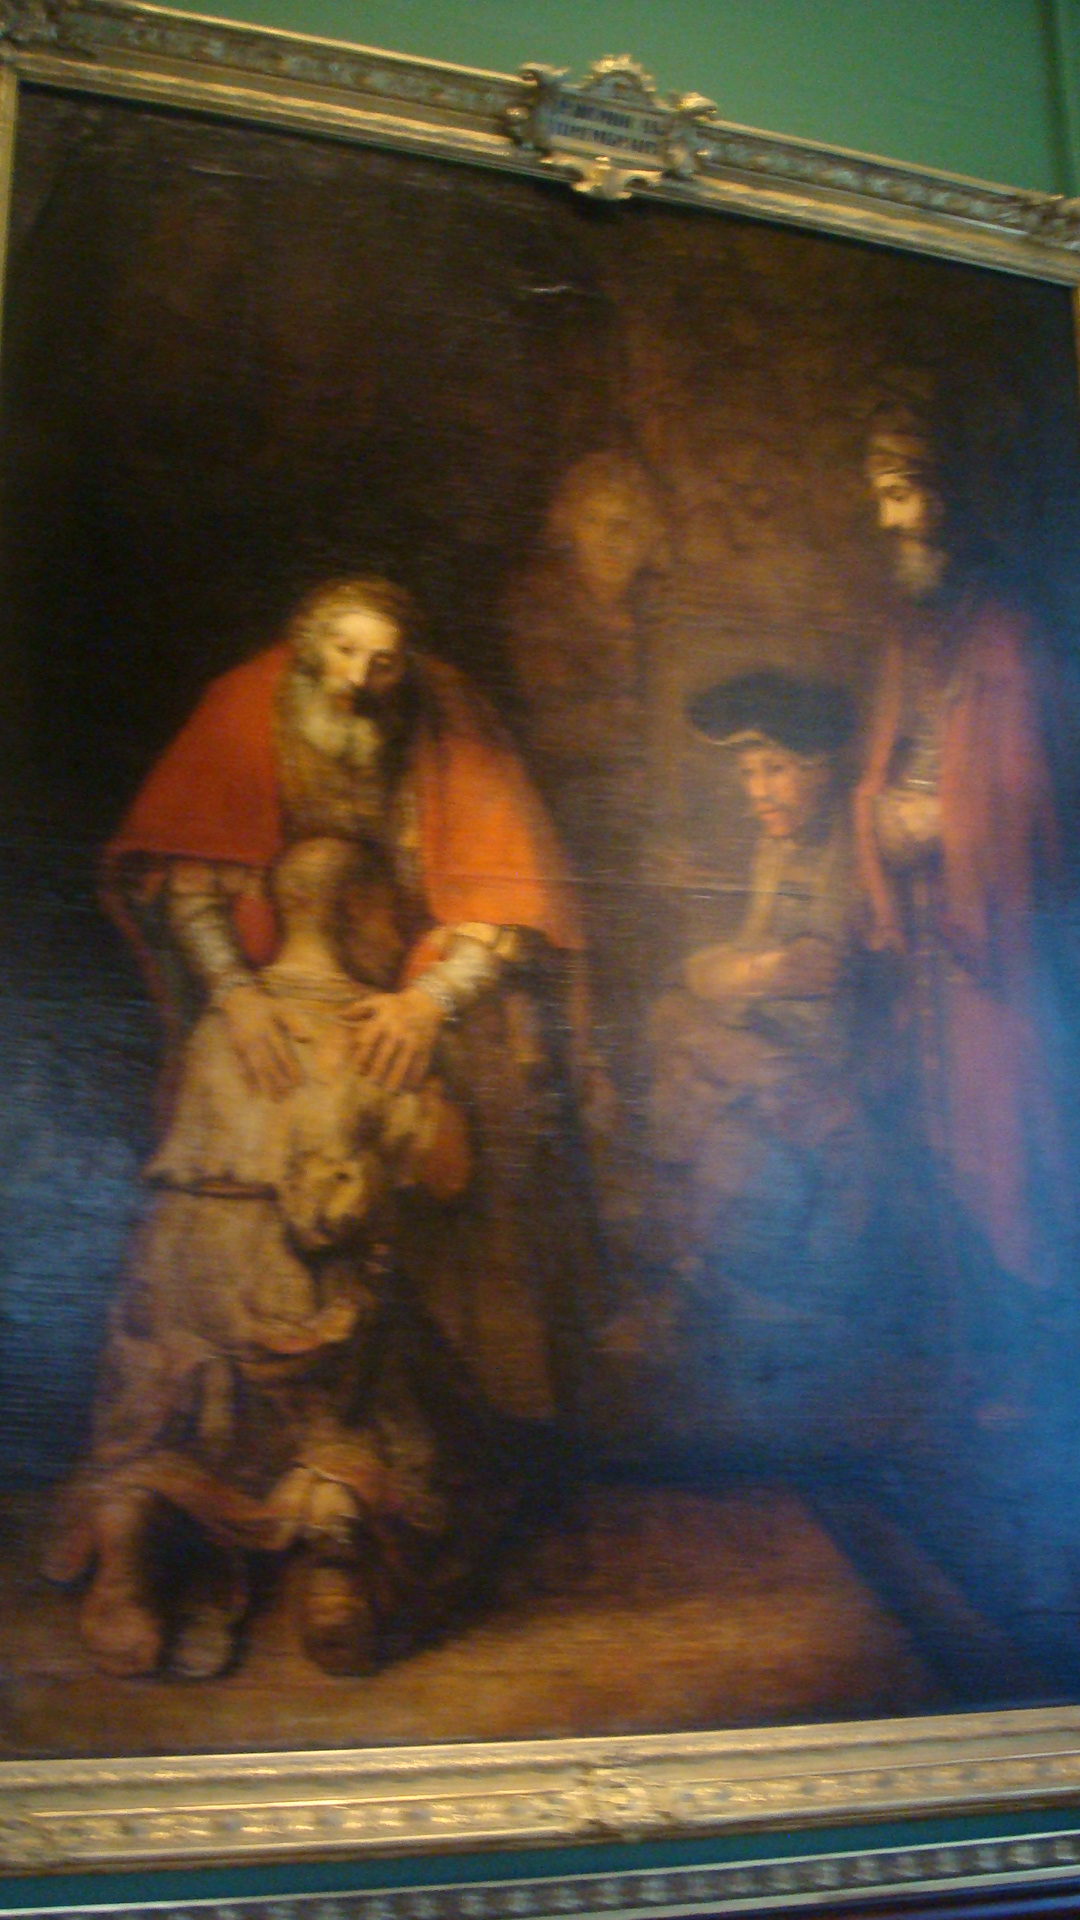 a painting depicting a figure on display inside a museum